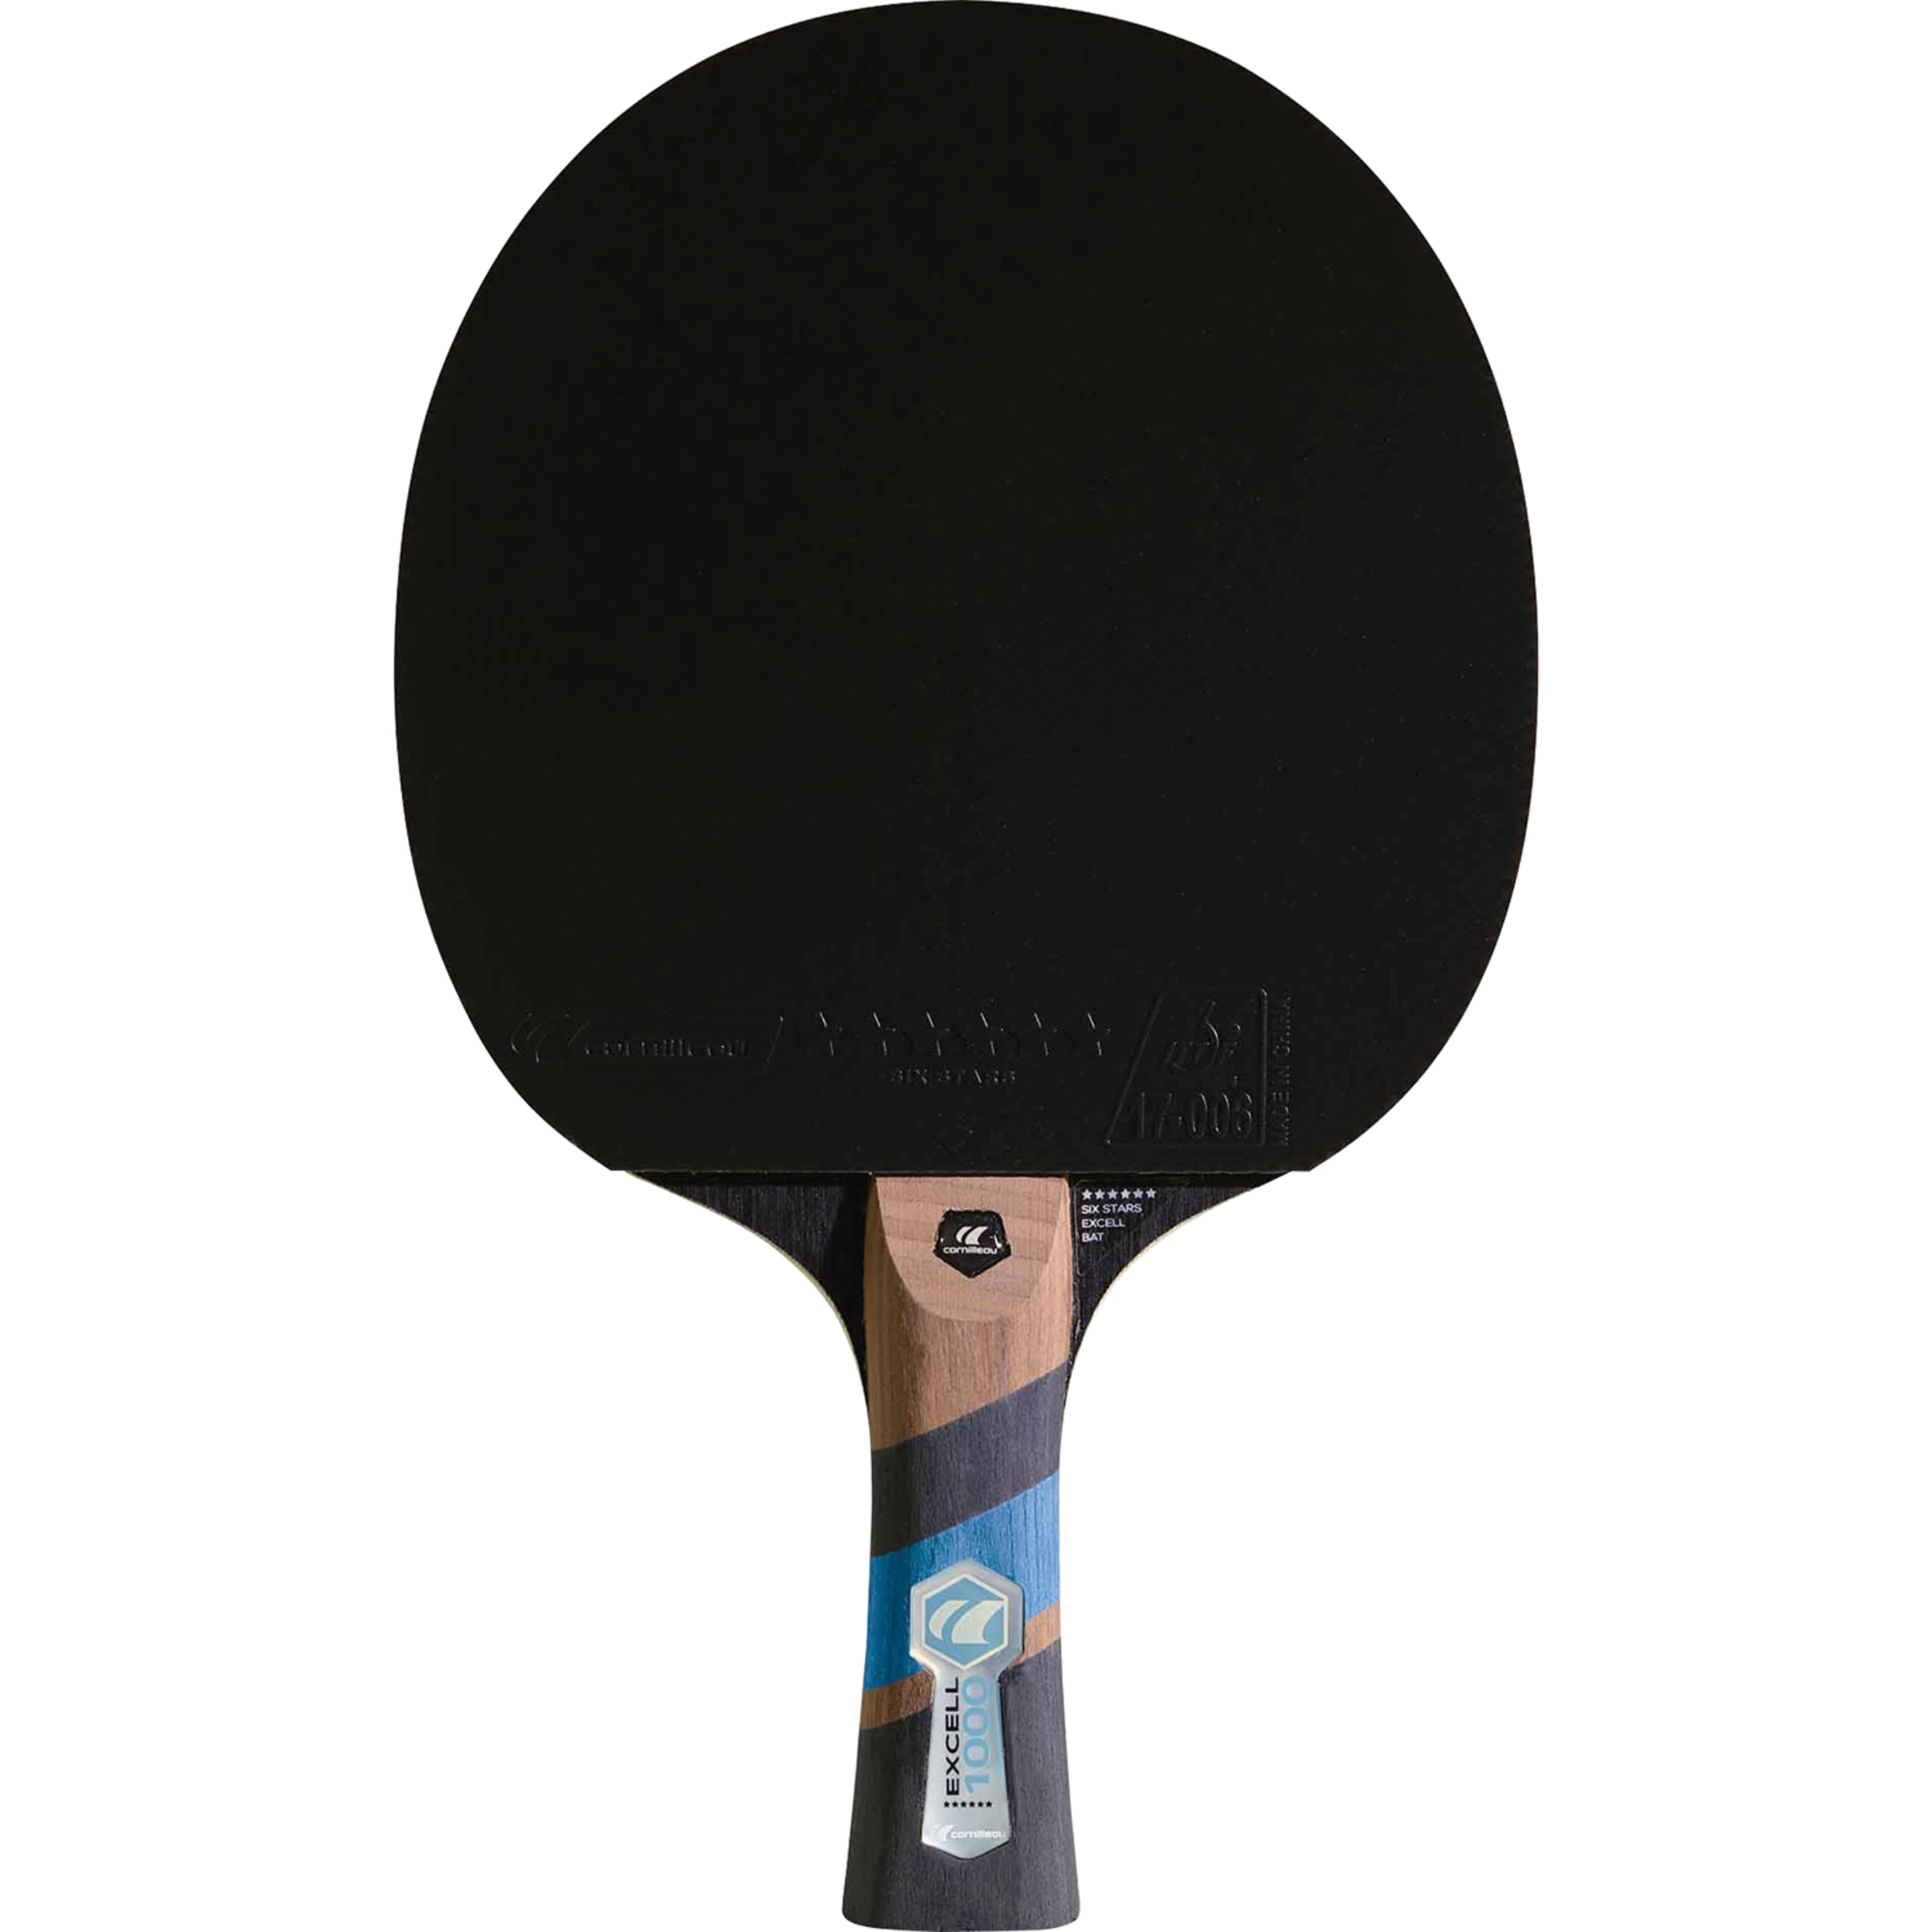 Raquete Ping Pong Cornilleau Excell 1000